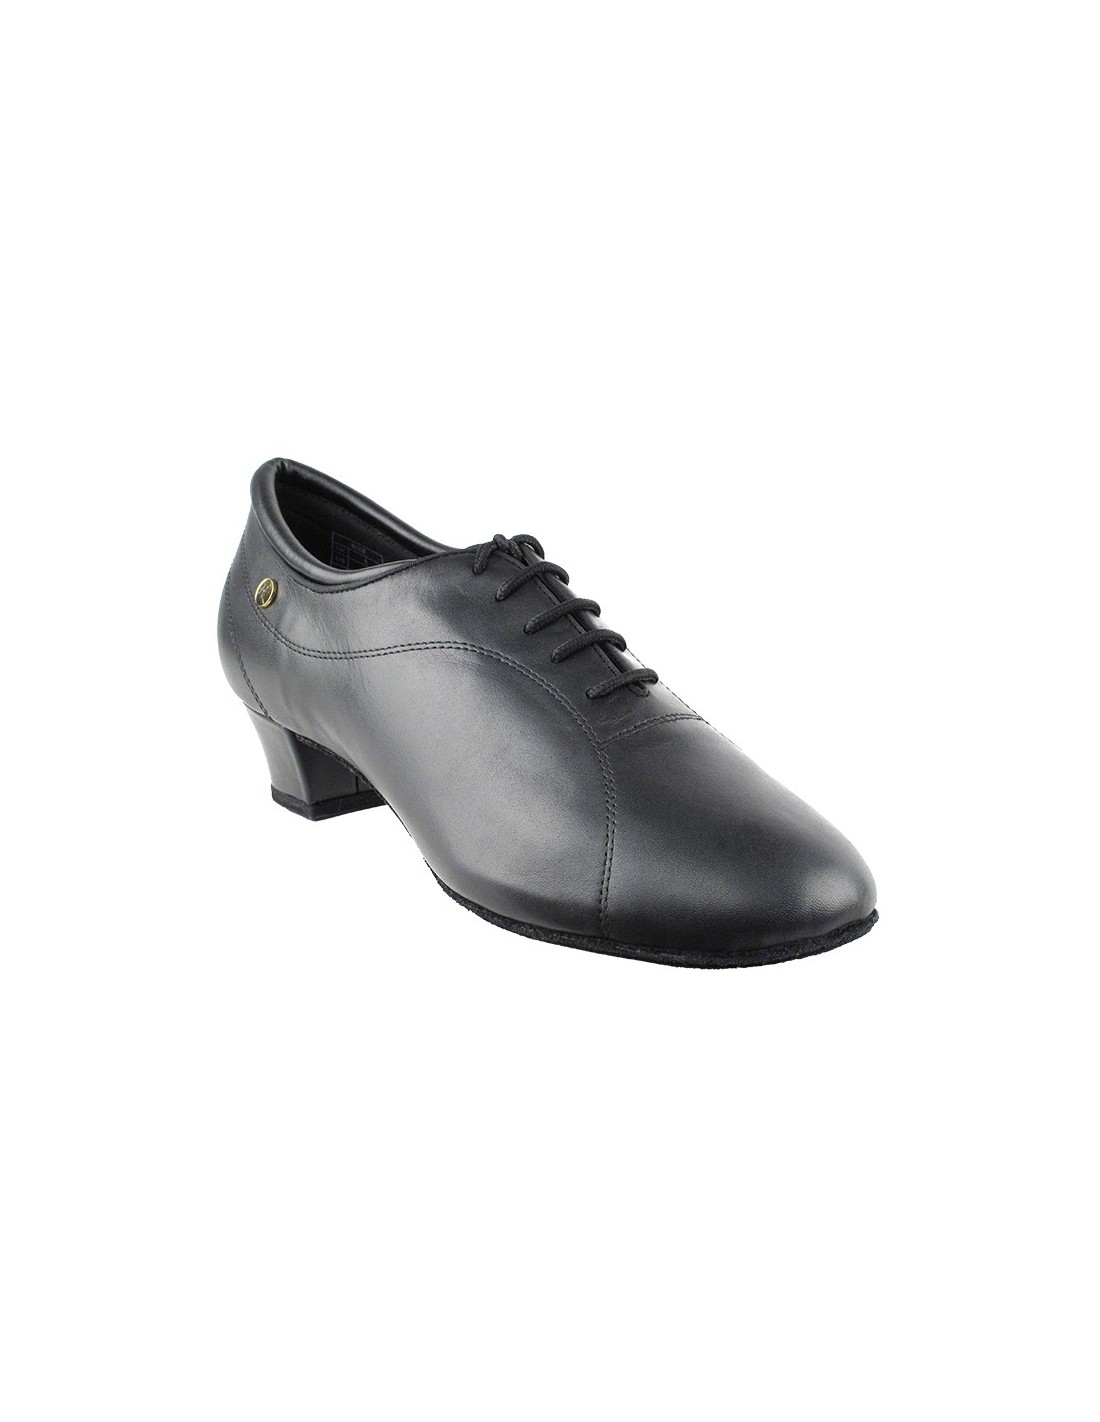 Mens latin dance shoes in black leather with full sole for dance  competitions